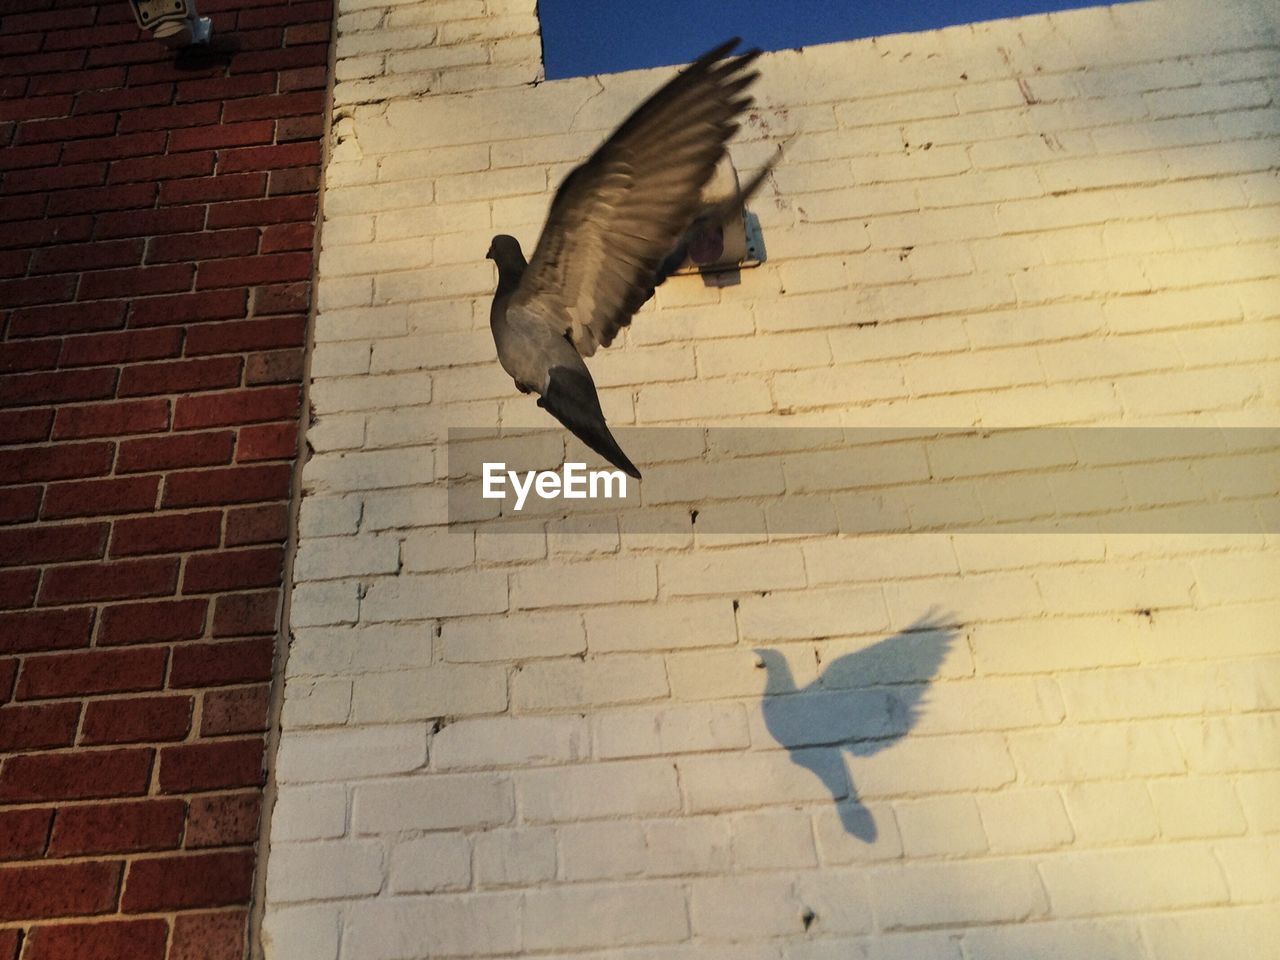 Pigeon flying in front of brick wall